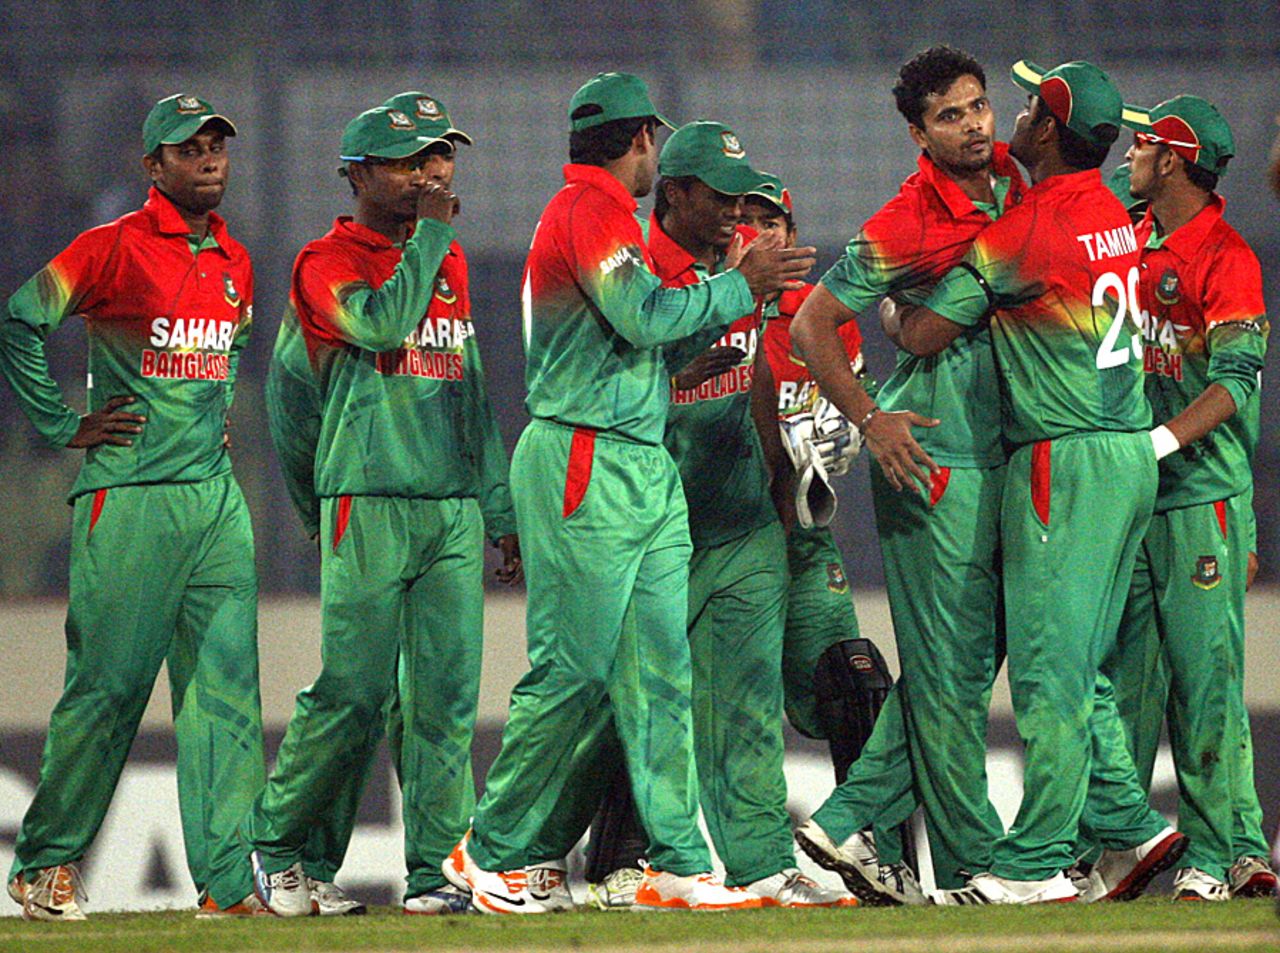 Mashrafe Mortaza is greeted by his team-mates after he dismissed Chris Gayle cheaply, Bangladesh v West Indies, 3rd ODI, Mirpur, December 5, 2012